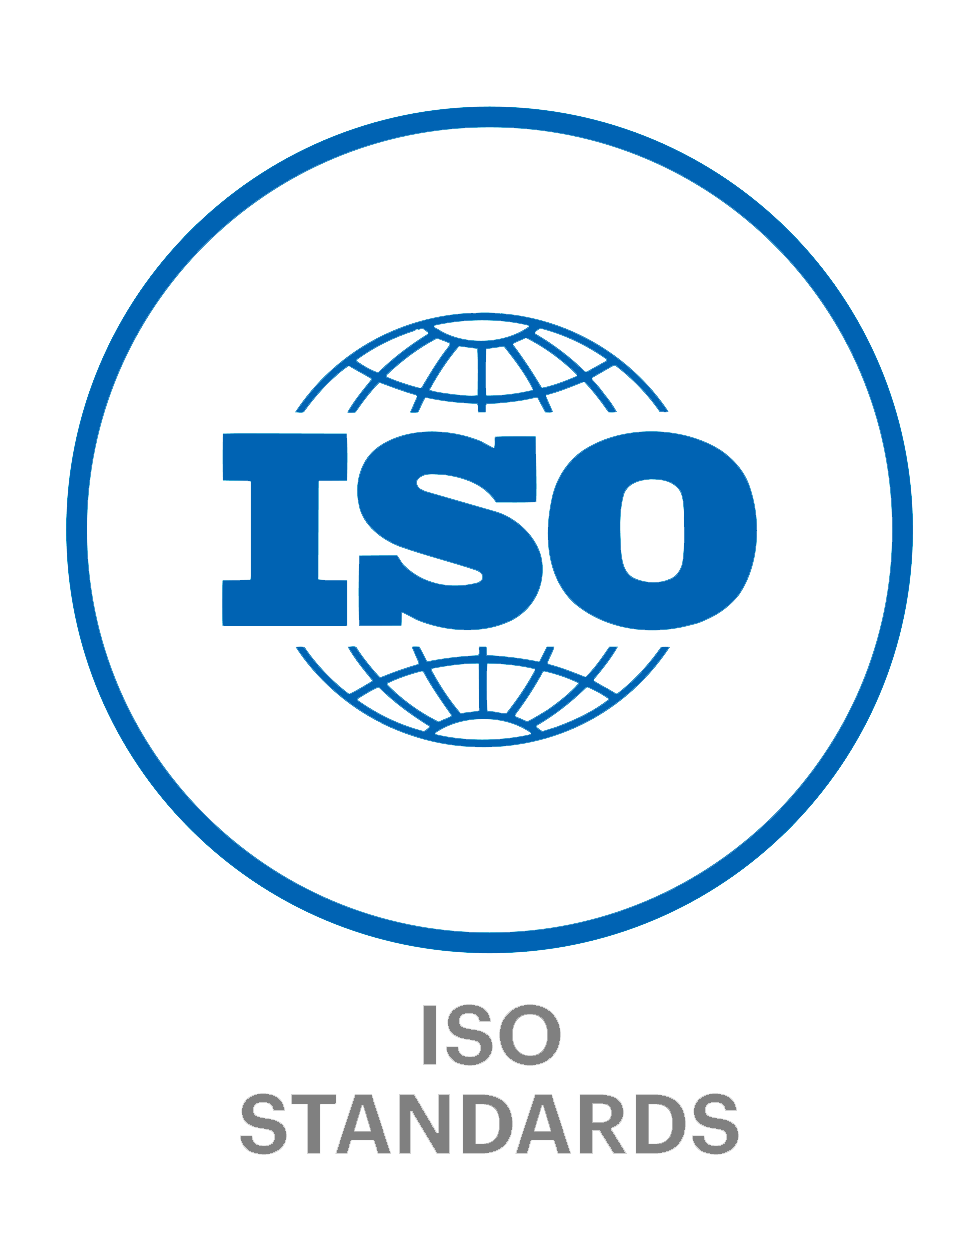 Iso standards